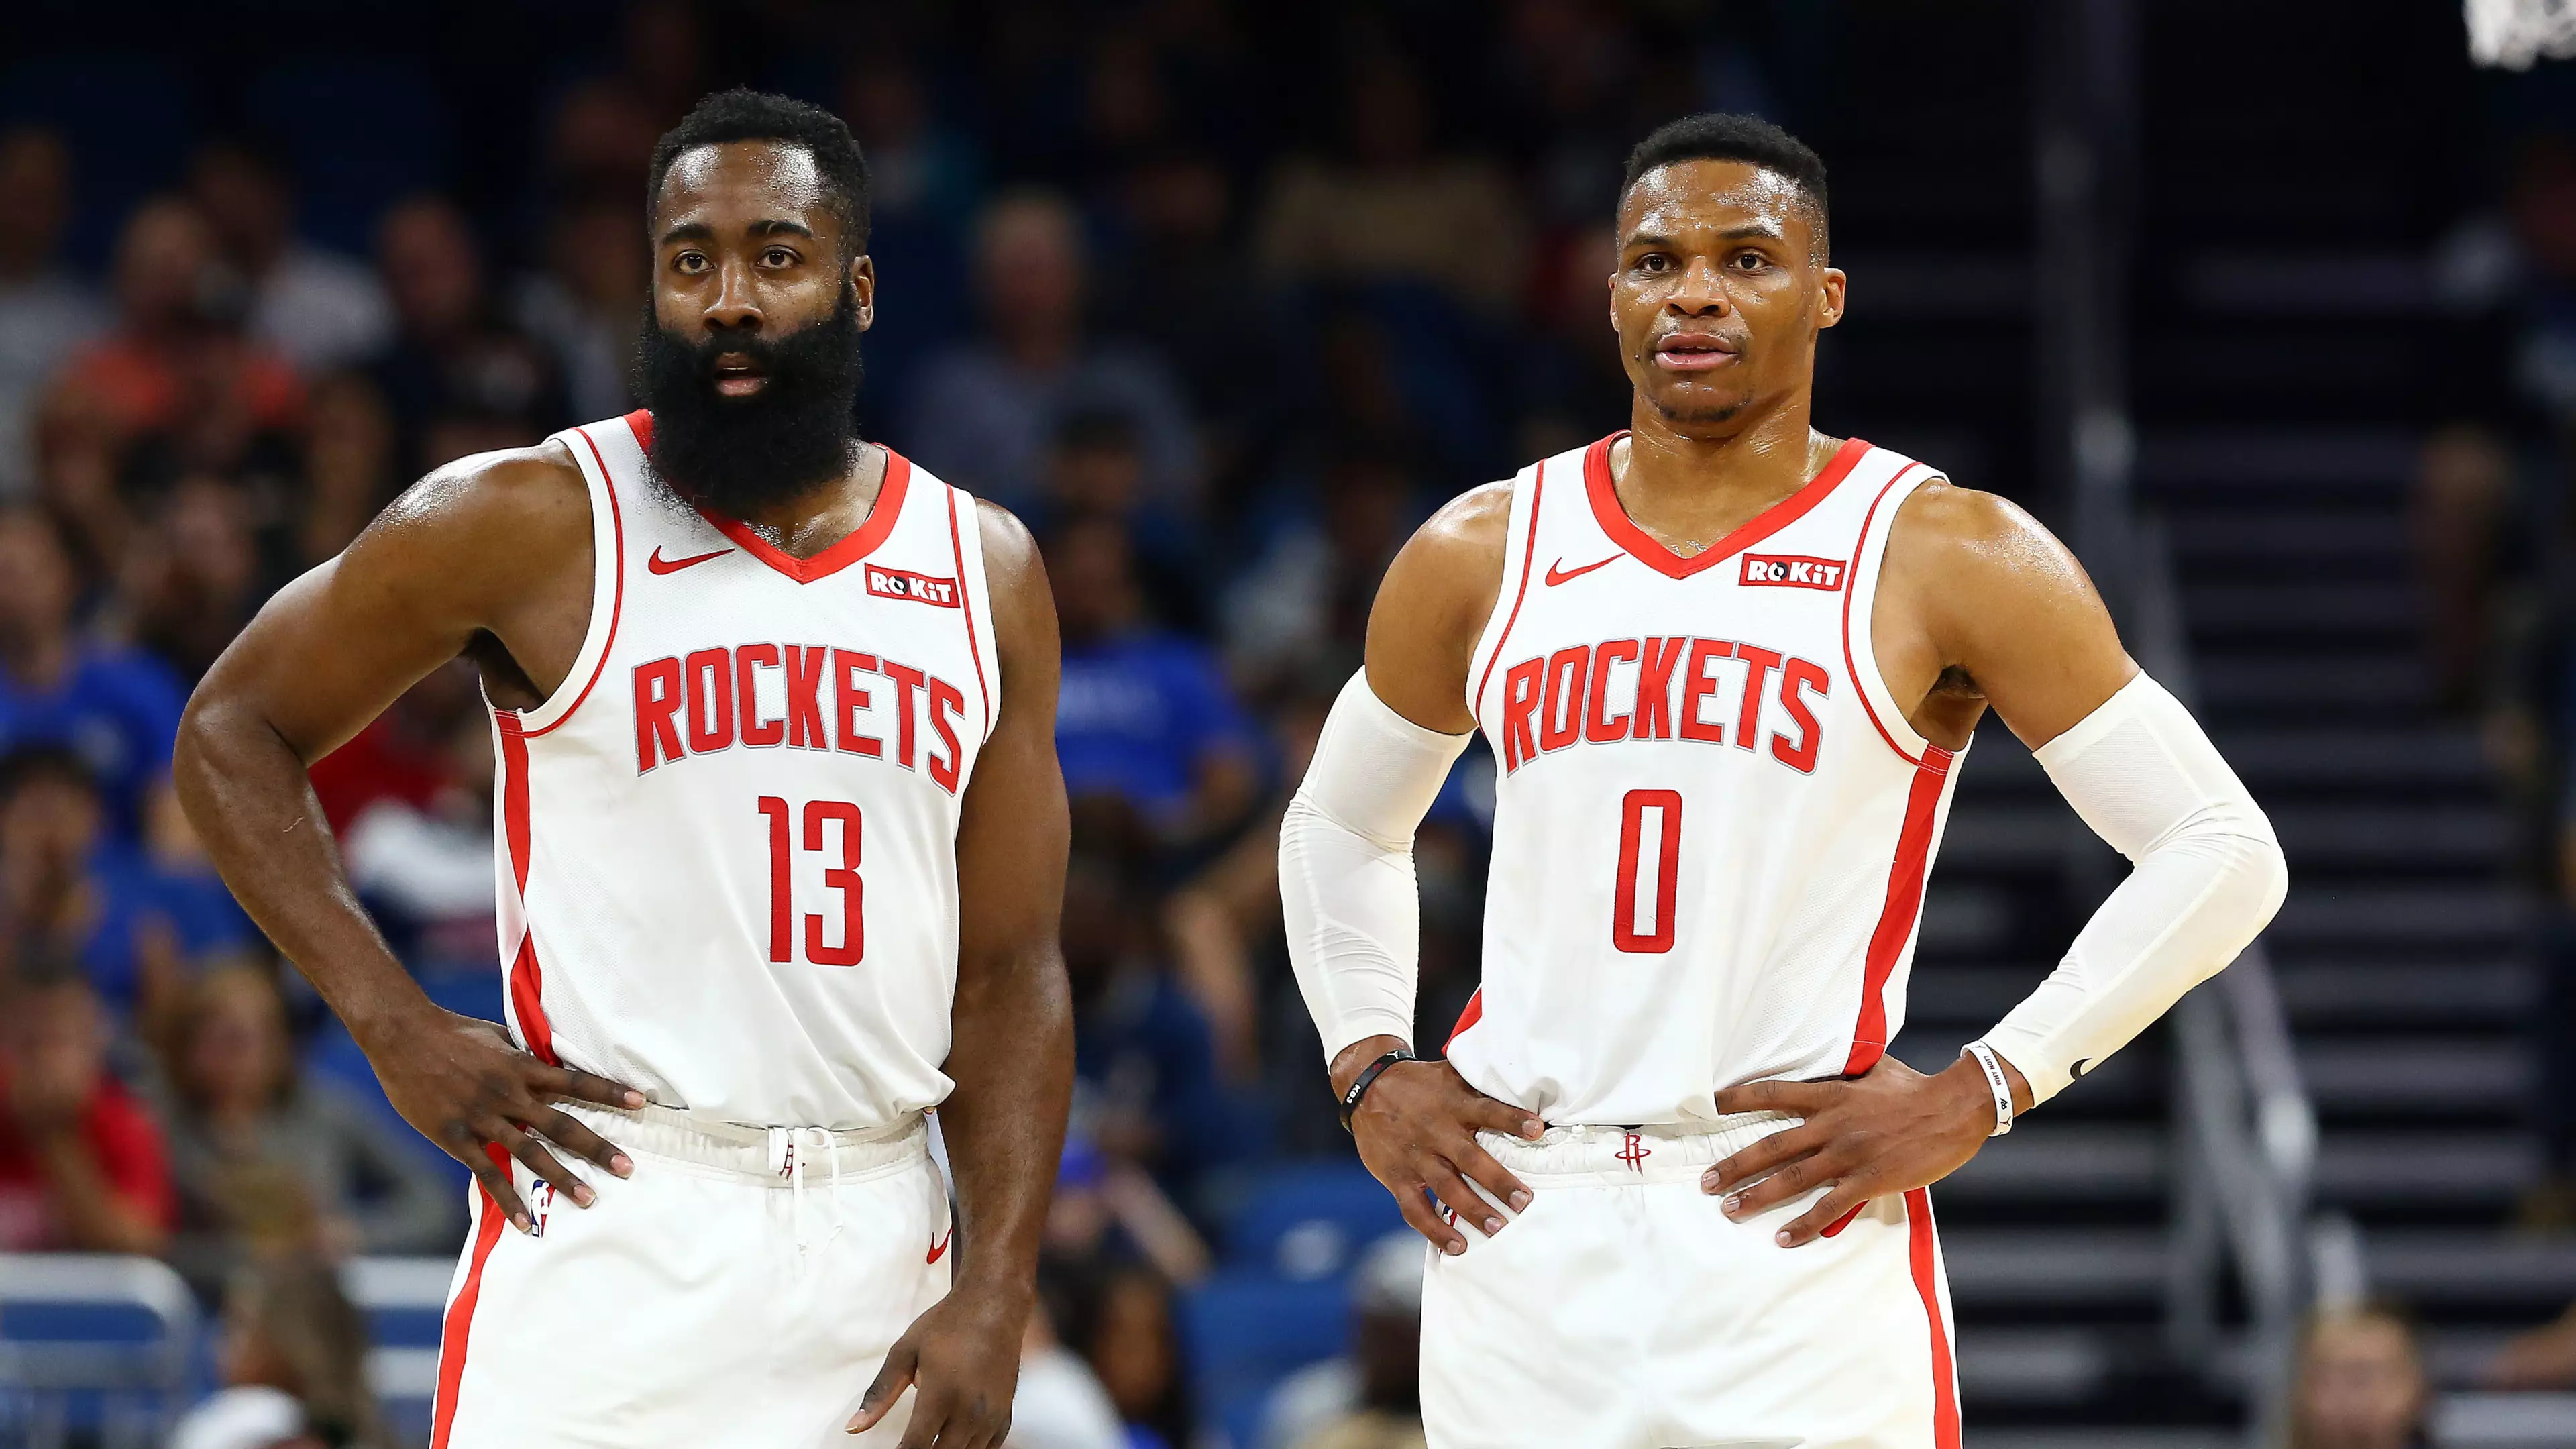 James Harden already has one foot out the door and Russell Westbrook only lasted one season in Houston.